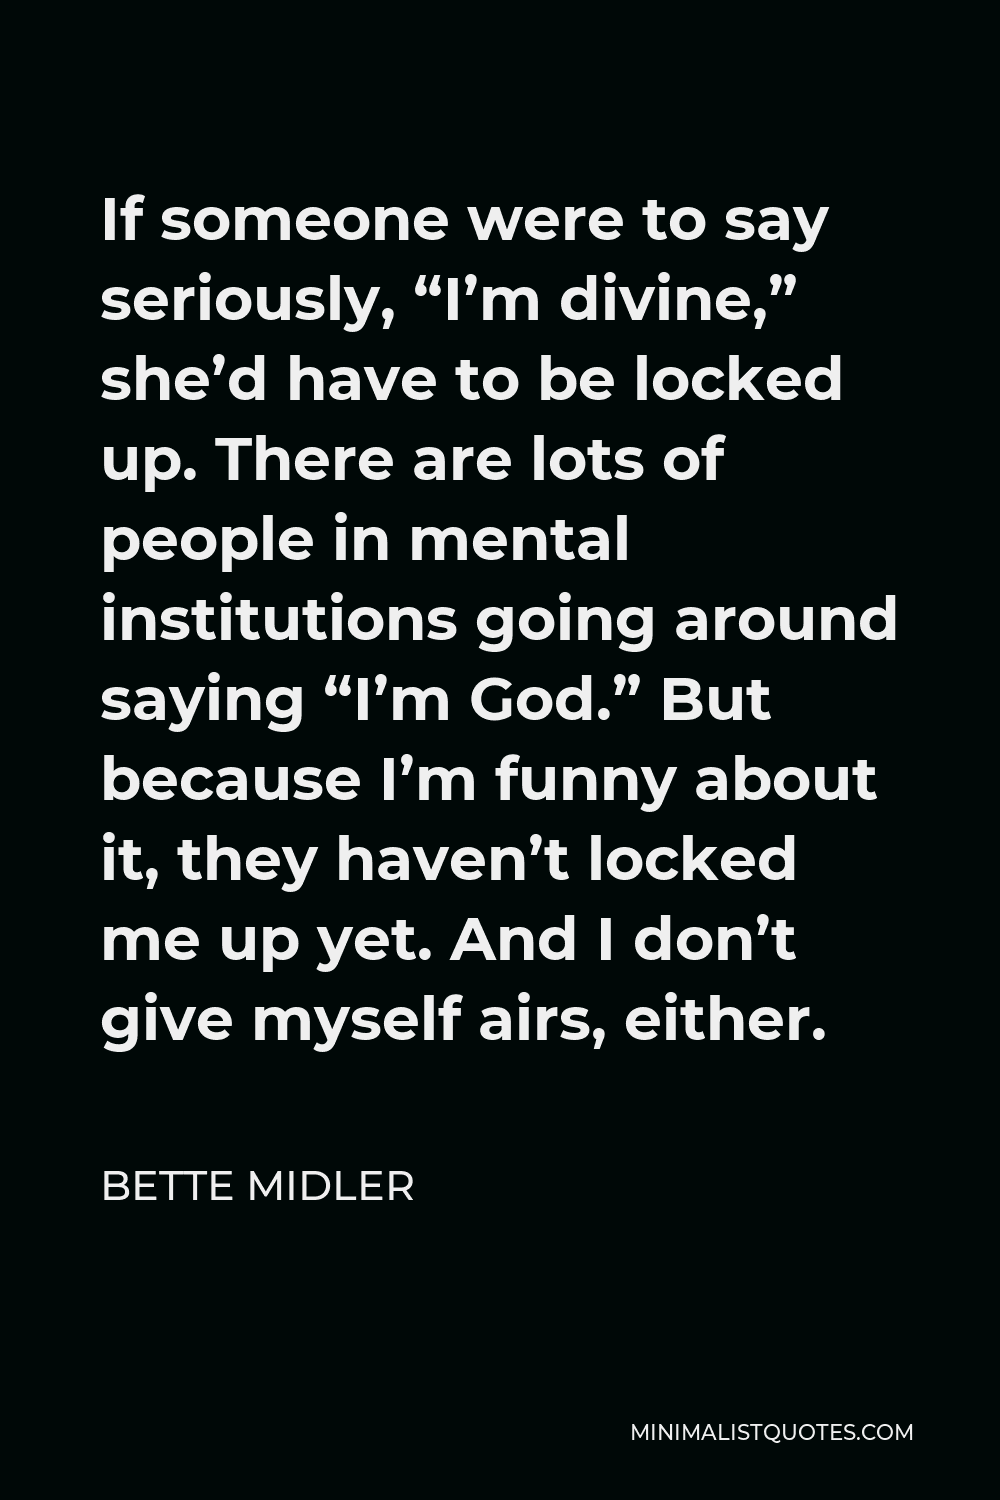 Bette Midler Quote - If someone were to say seriously, “I’m divine,” she’d have to be locked up. There are lots of people in mental institutions going around saying “I’m God.” But because I’m funny about it, they haven’t locked me up yet. And I don’t give myself airs, either.